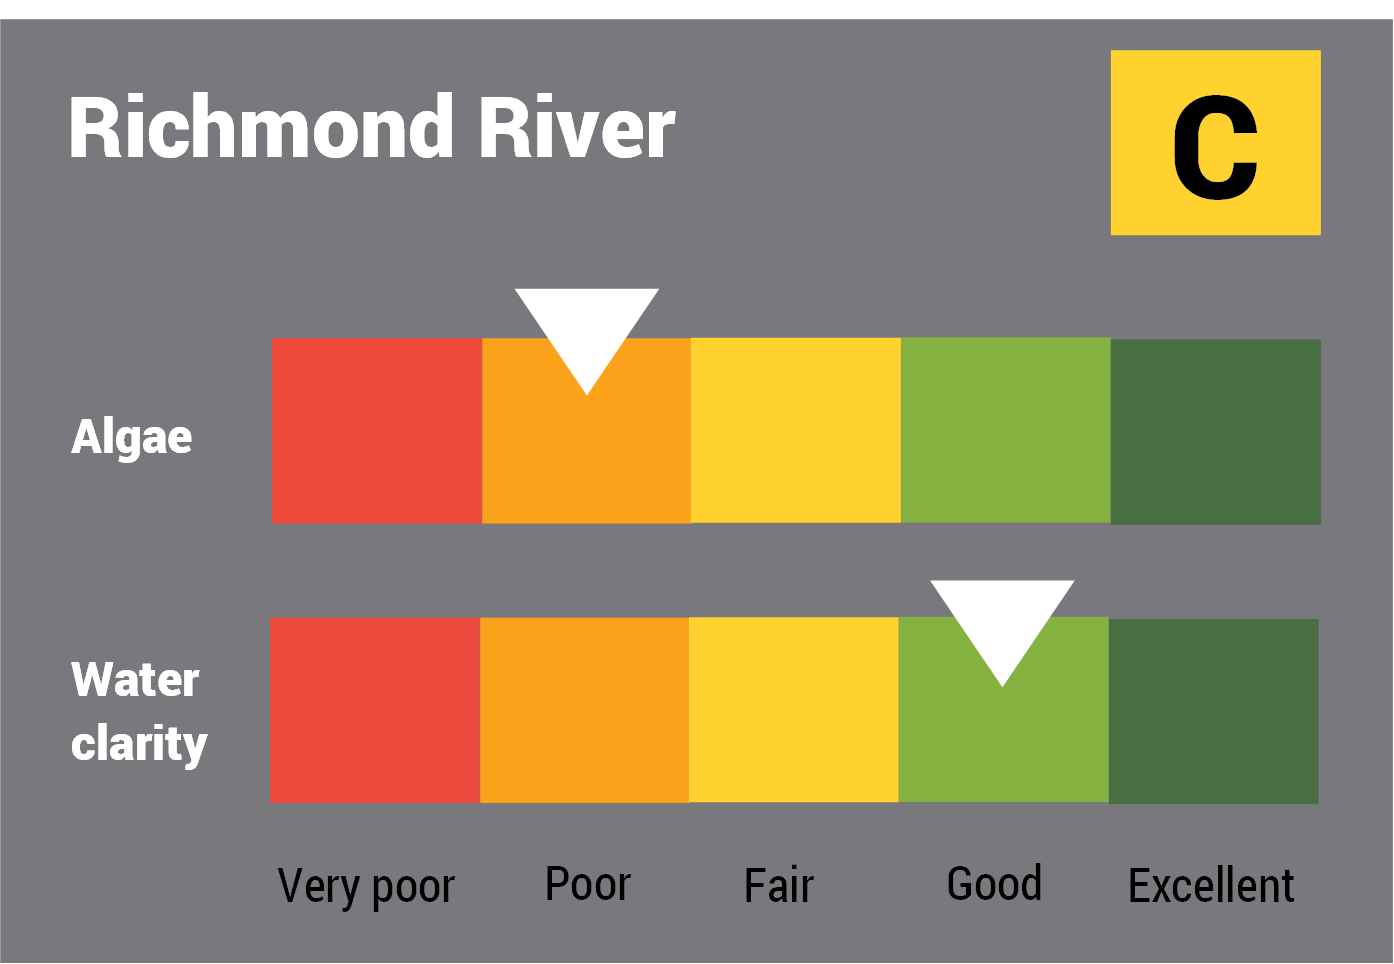 Richmond River water quality report card for algae and water clarity showing colour-coded ratings (red, orange, yellow, light green and dark green, which represent very poor, poor, fair, good and excellent, respectively). Algae is rated 'good' and water clarity is rated 'poor' giving an overall rating of 'fair' or 'C'.